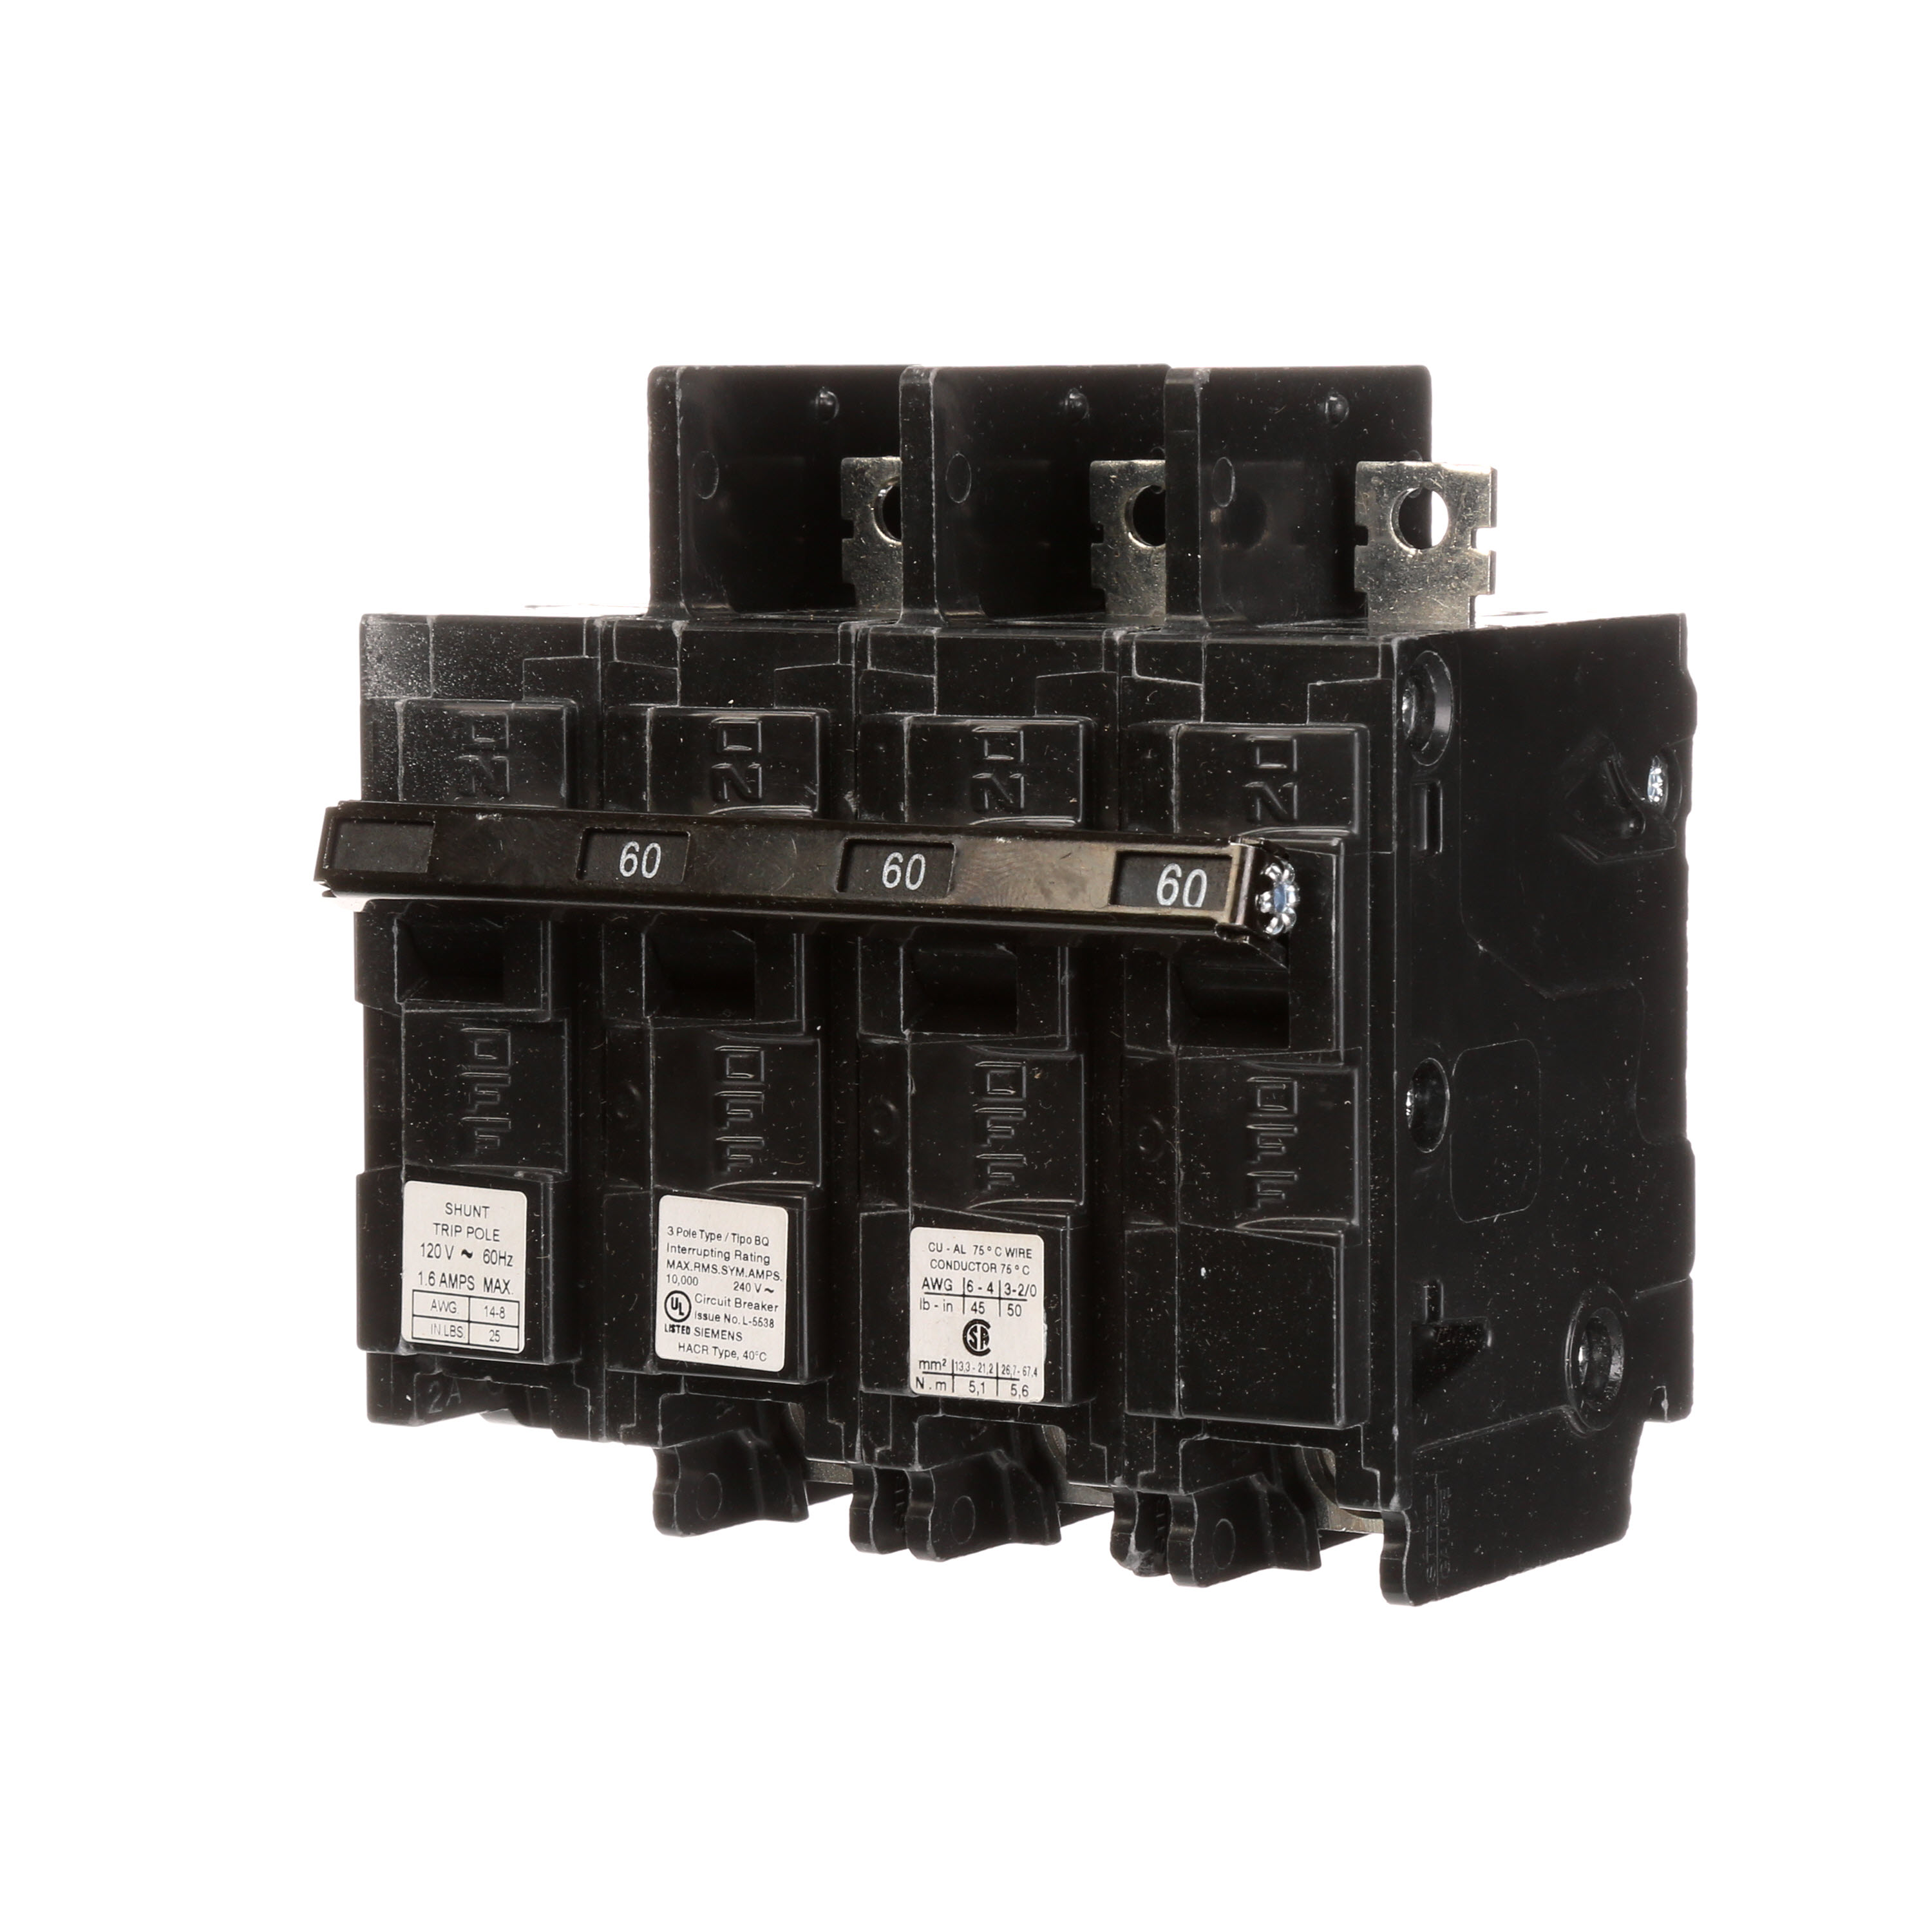 Siemens Low Voltage Molded Case Circuit Breakers General Purpose MCCBs are Circuit Protection Molded Case Circuit Breakers. 3-Pole Common-Trip circuit breaker type BQ. Rated 240V (060A) (AIR 10 kA). Special features 120VAC Shunt Trip. NoteLoad side lugs are included.